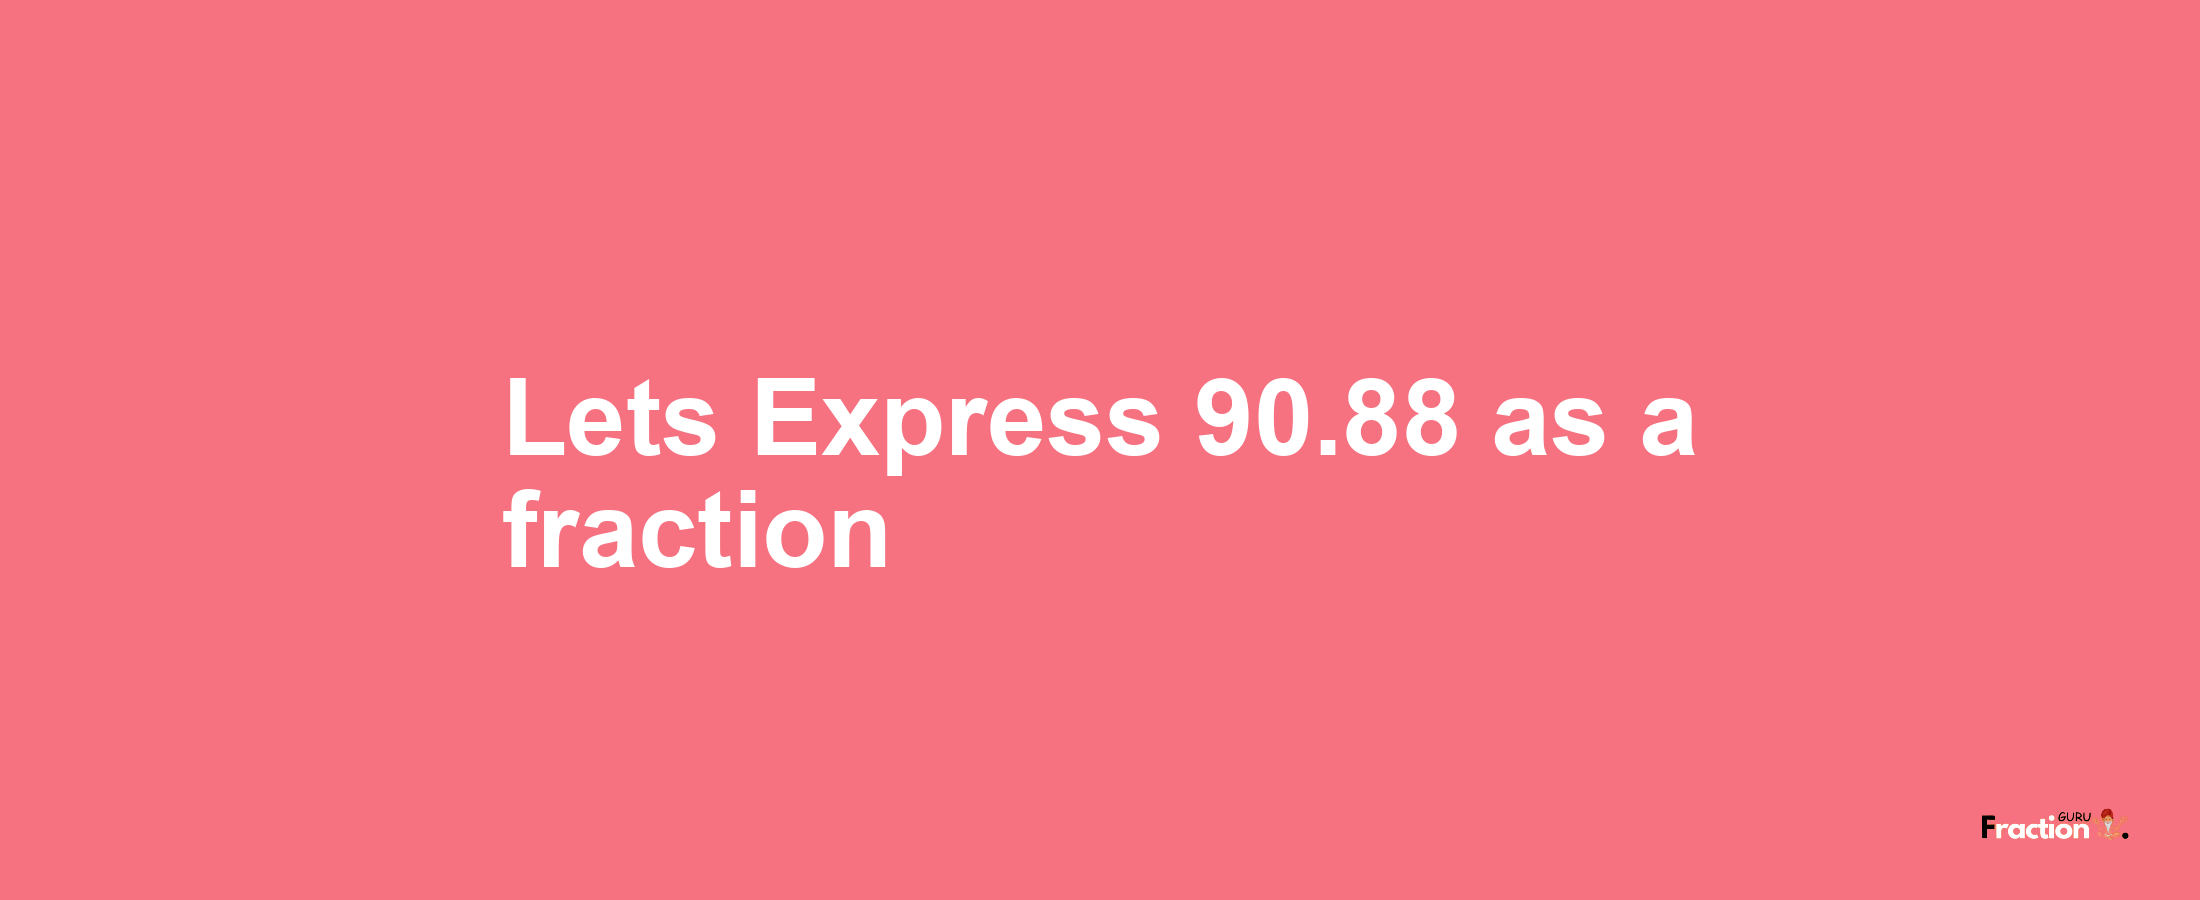 Lets Express 90.88 as afraction